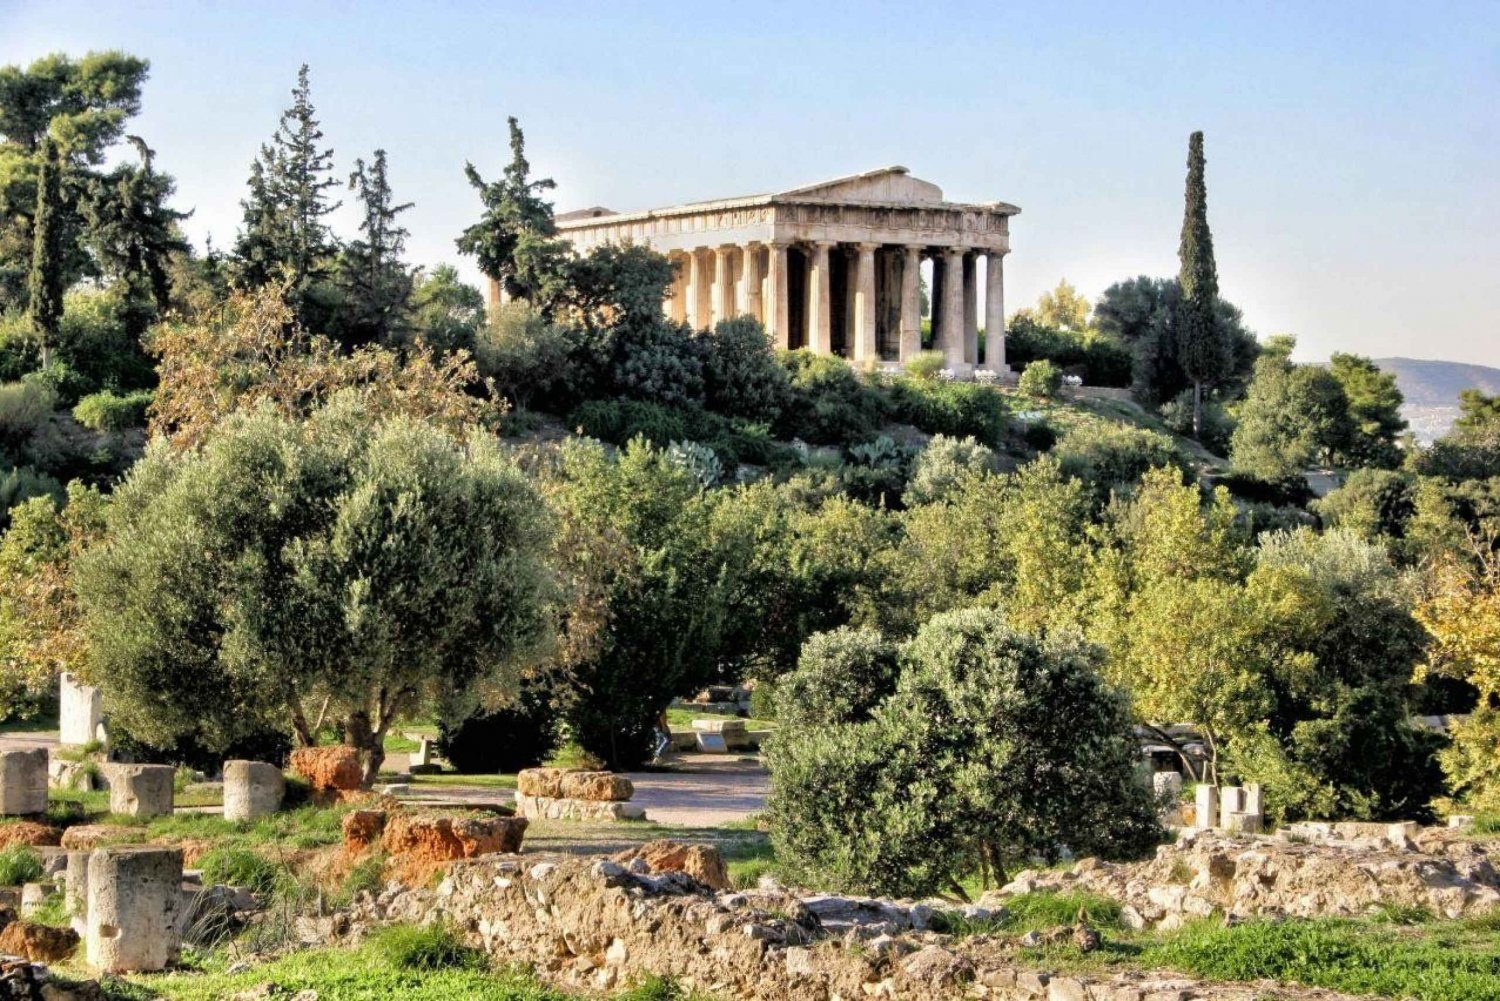 Best of Athens in a Fast Tour